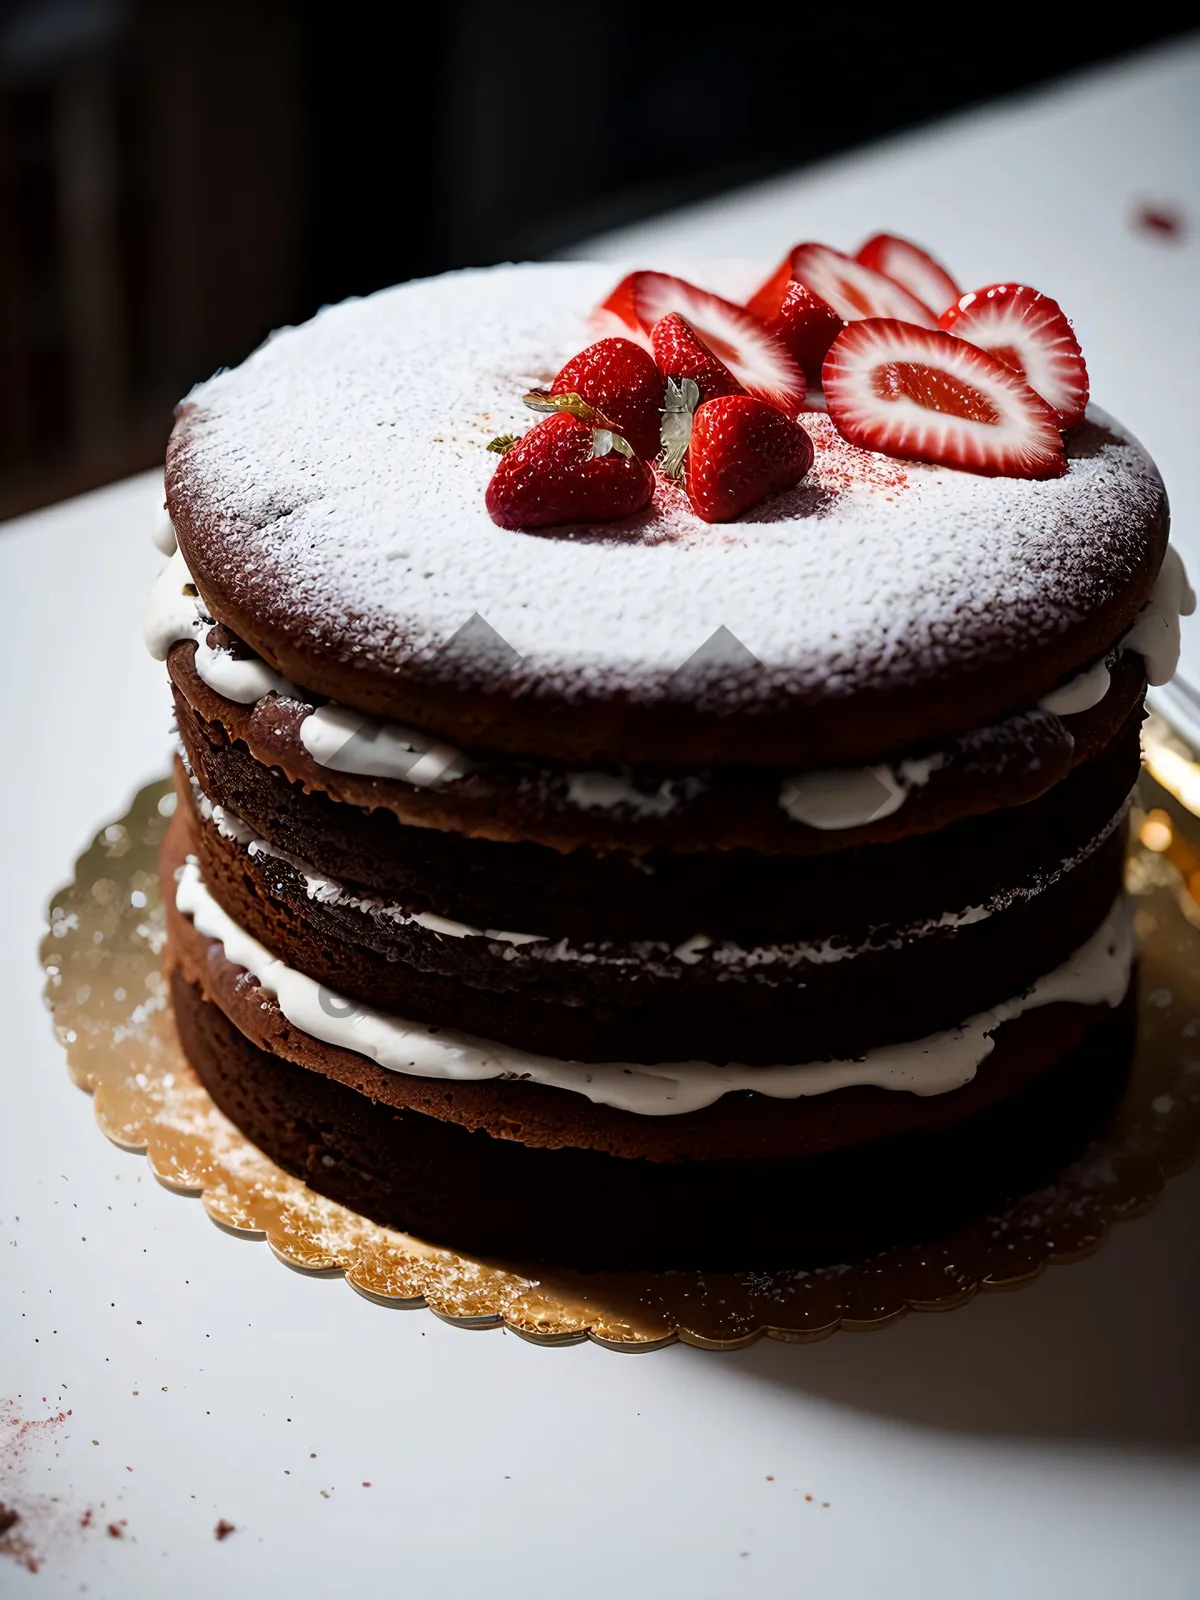 Picture of Delicious Gourmet Chocolate Berry Cake with Cream